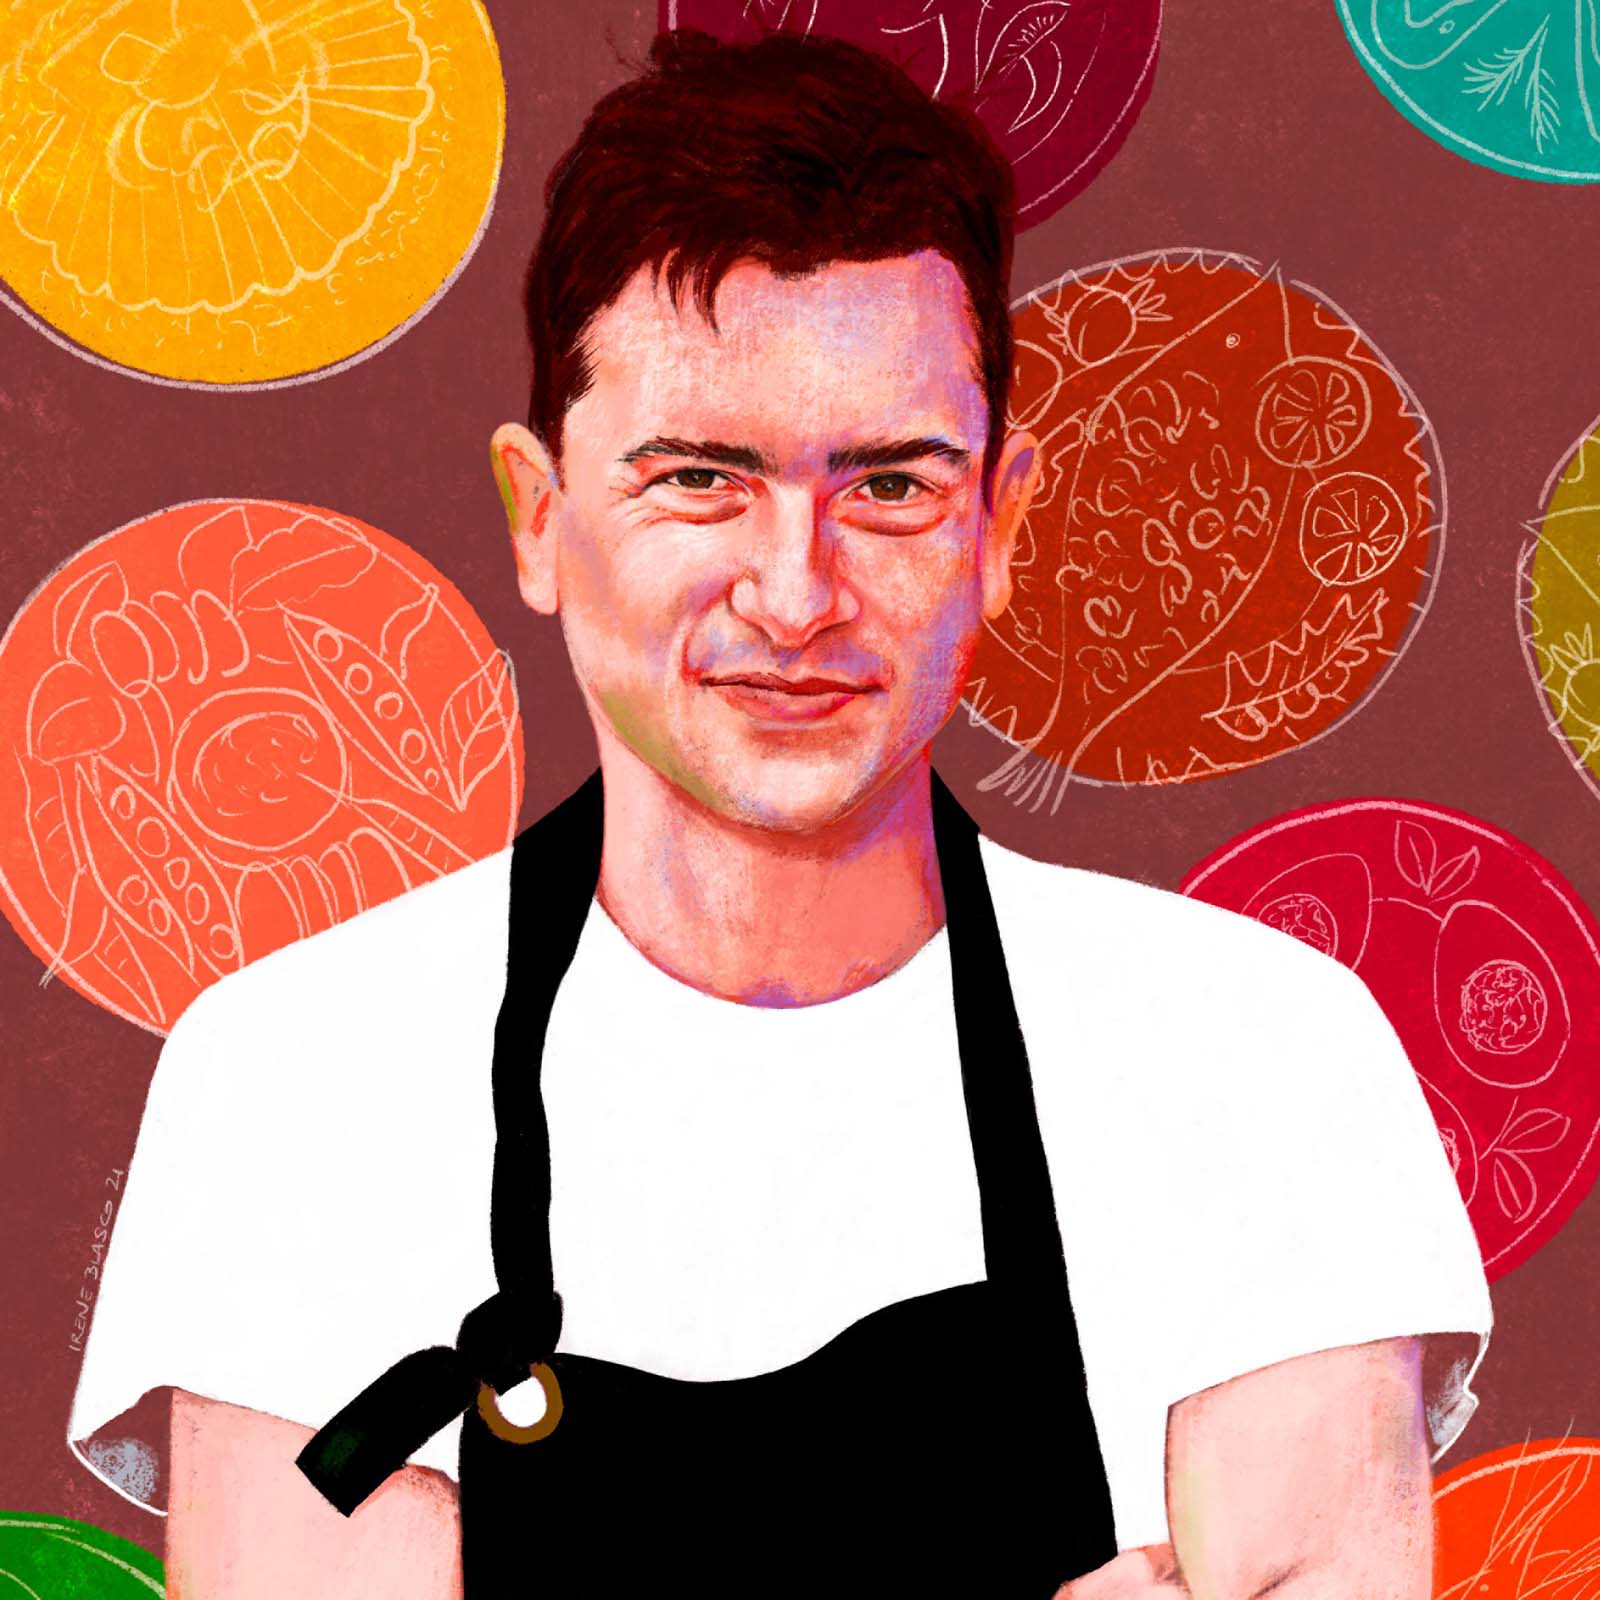 Chef Jackson Boxer on tallying success with sobriety